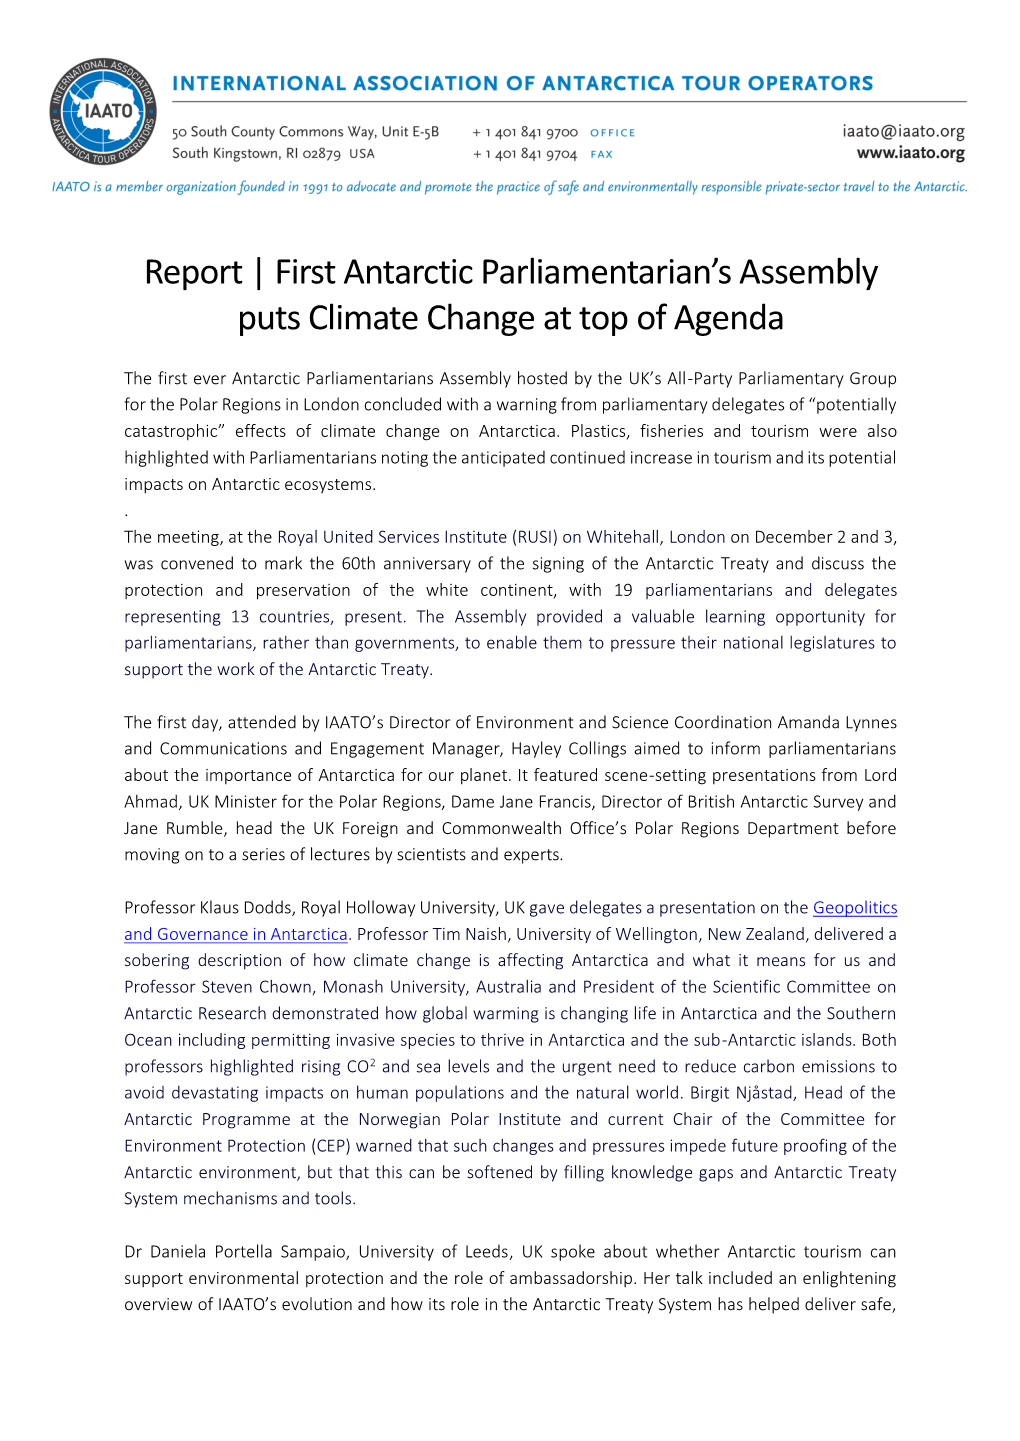 Report | First Antarctic Parliamentarian's Assembly Puts